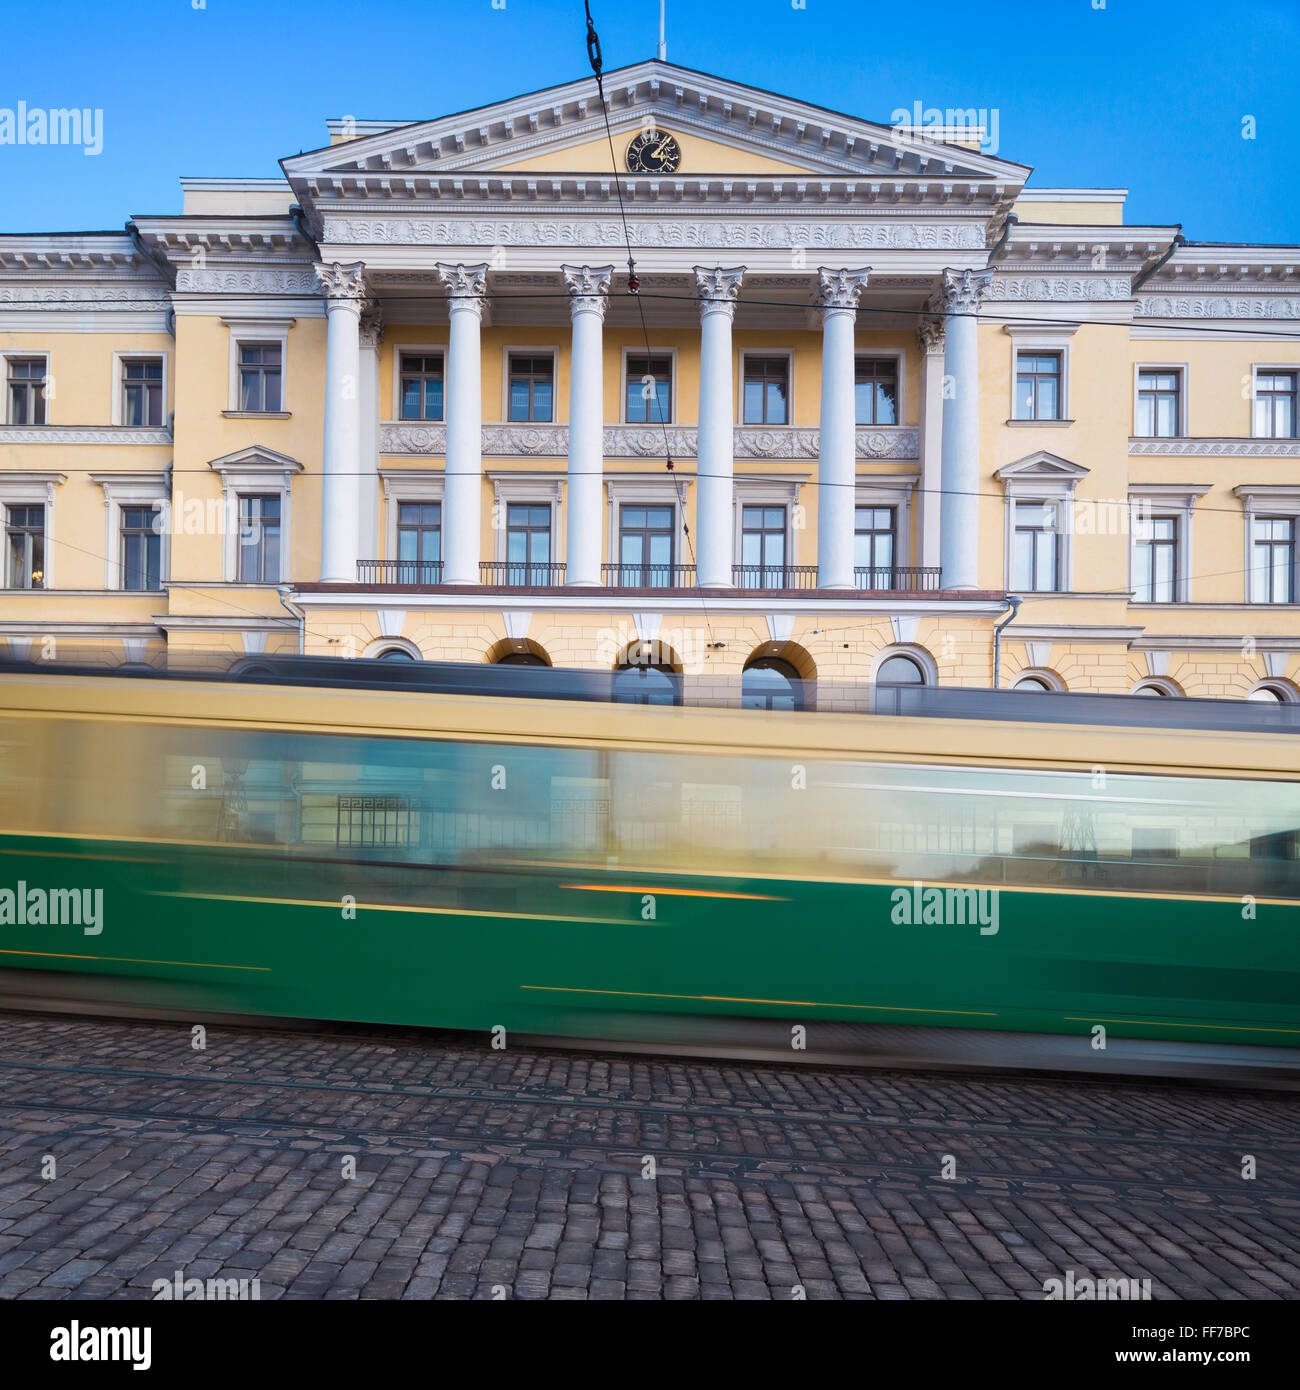 Prime minister's office and a tram in motion, Helsinki, Finland Stock Photo